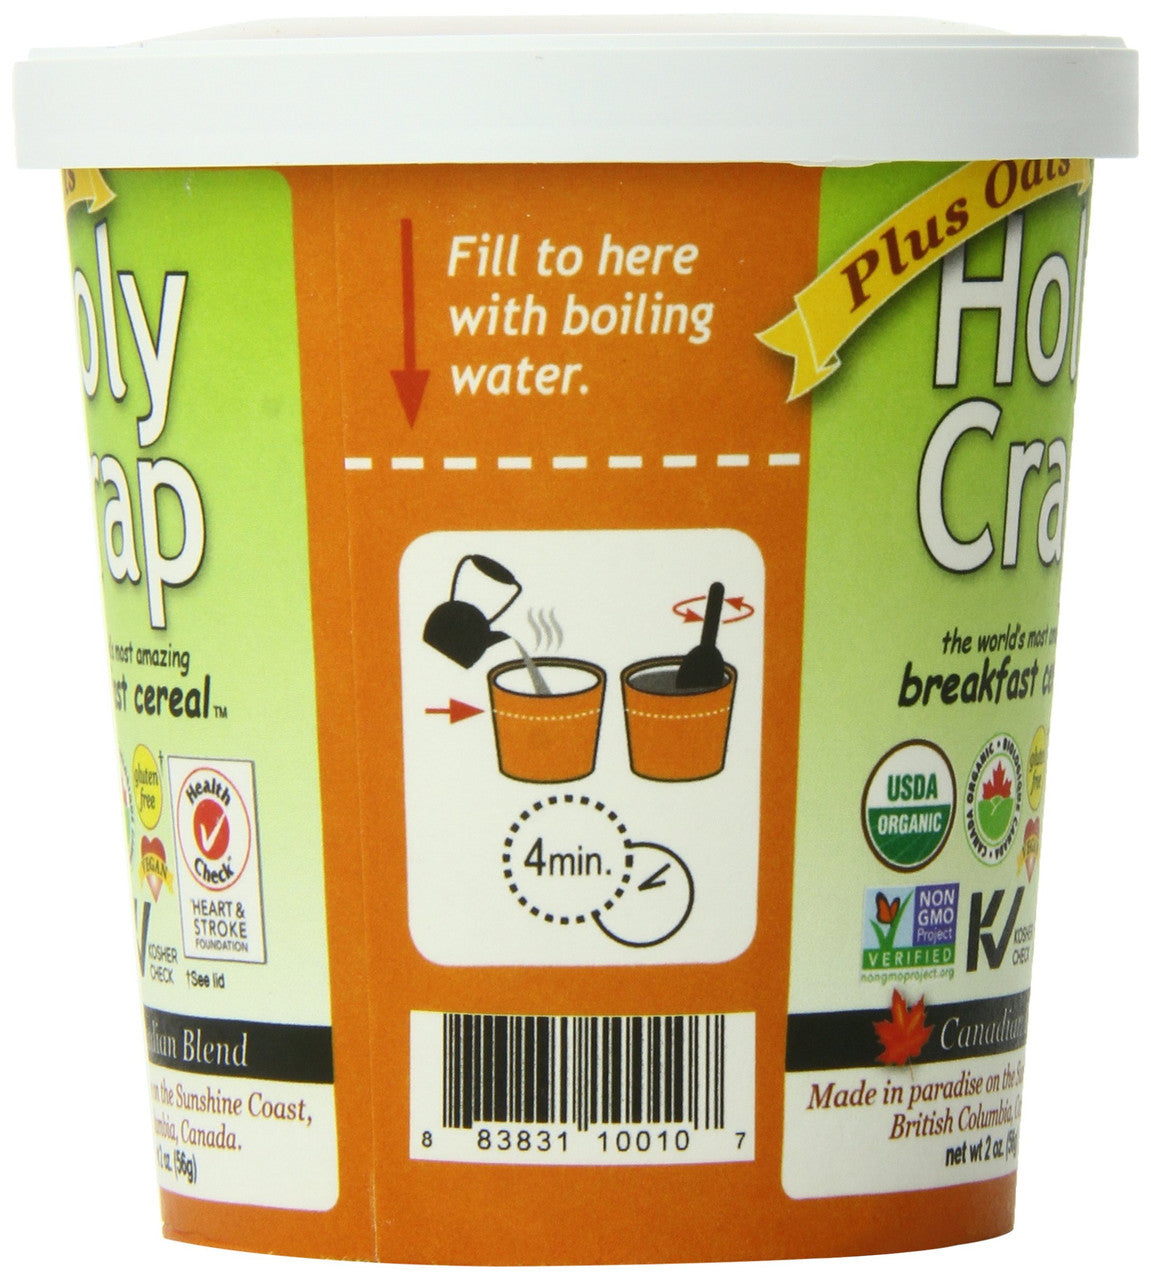 Holy Crap Plus Oats Cereal Cup, 2 Ounce (Pack of 12) {Imported from Canada}